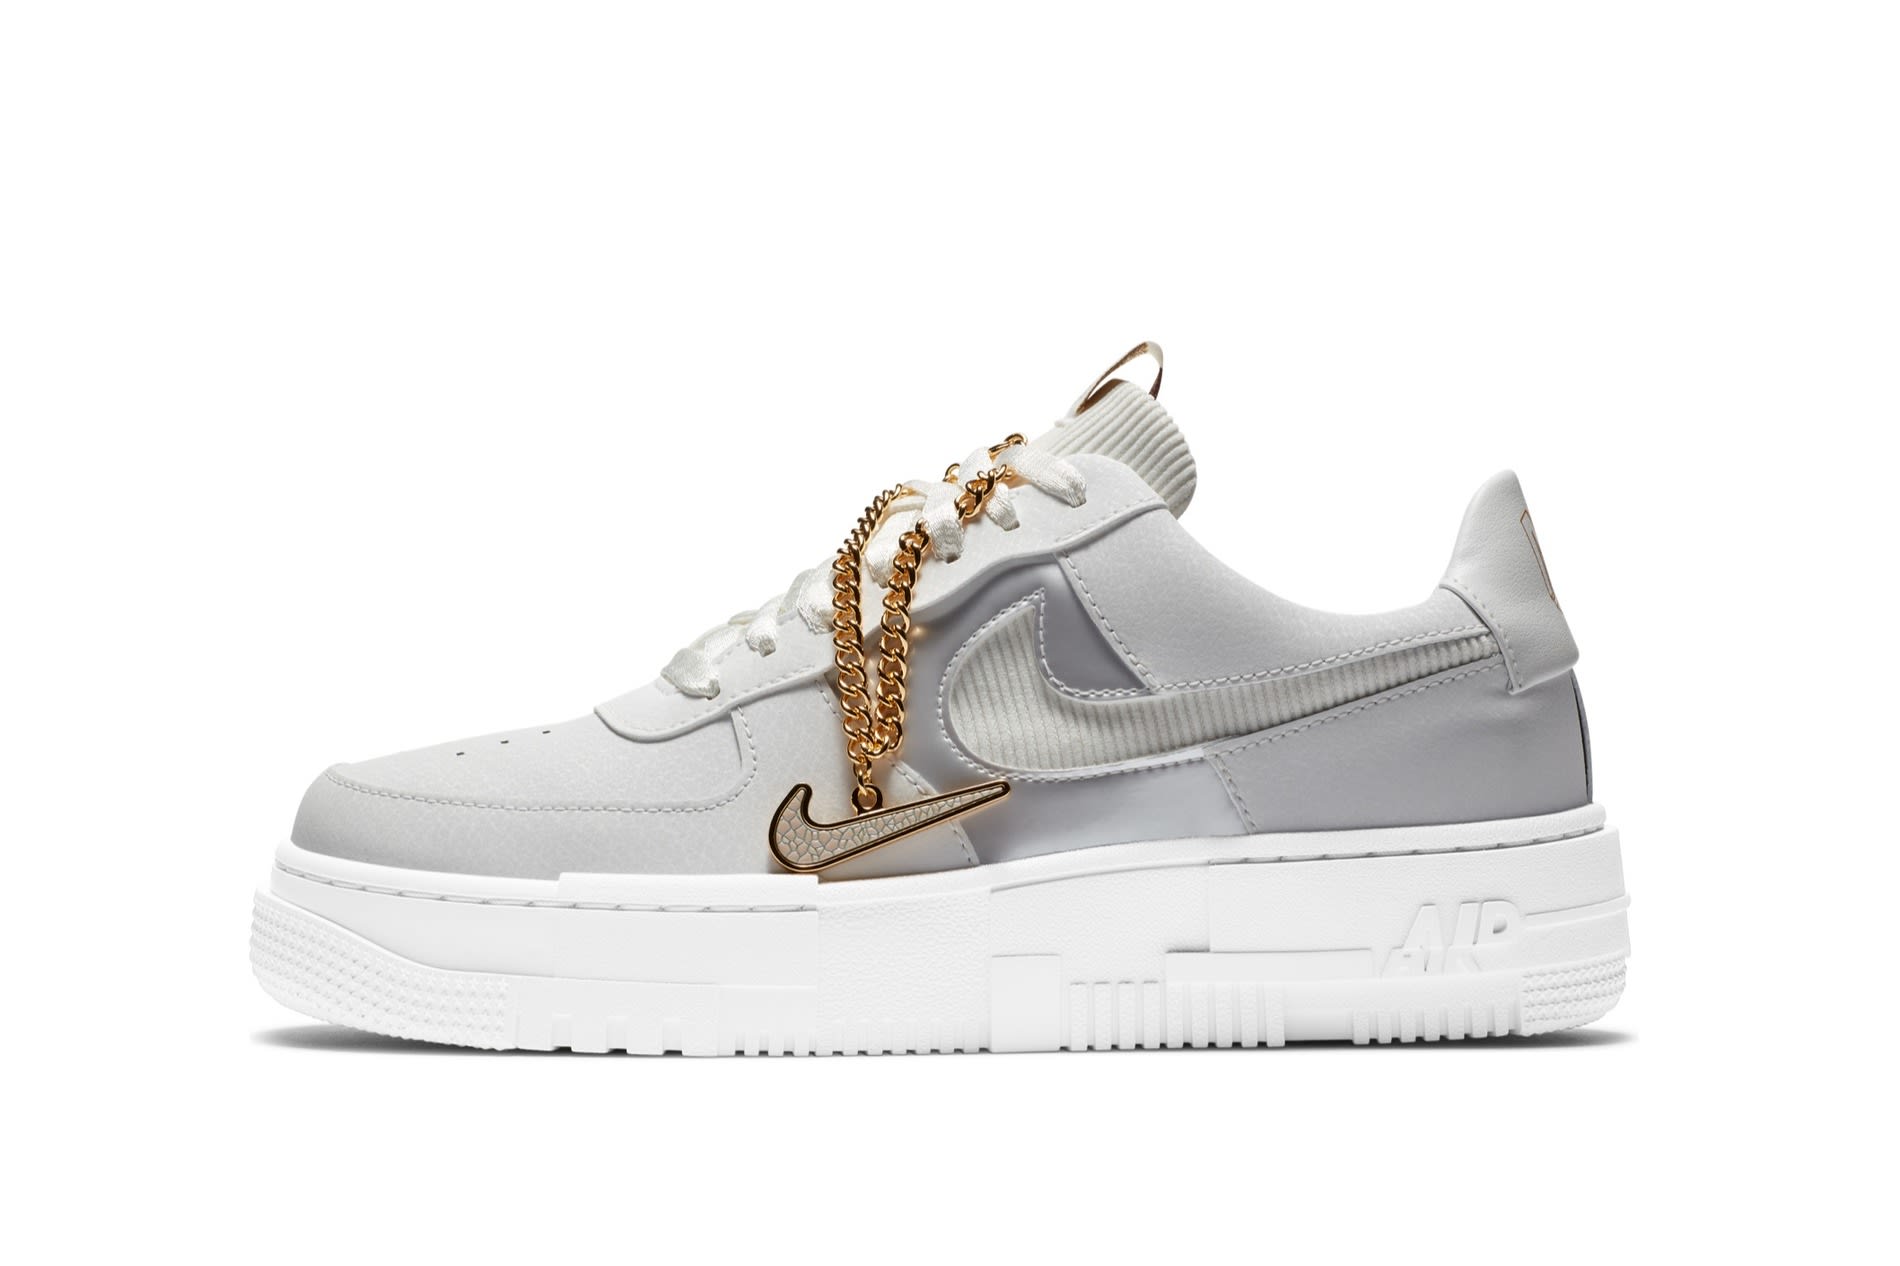 nike air force shoes price south africa